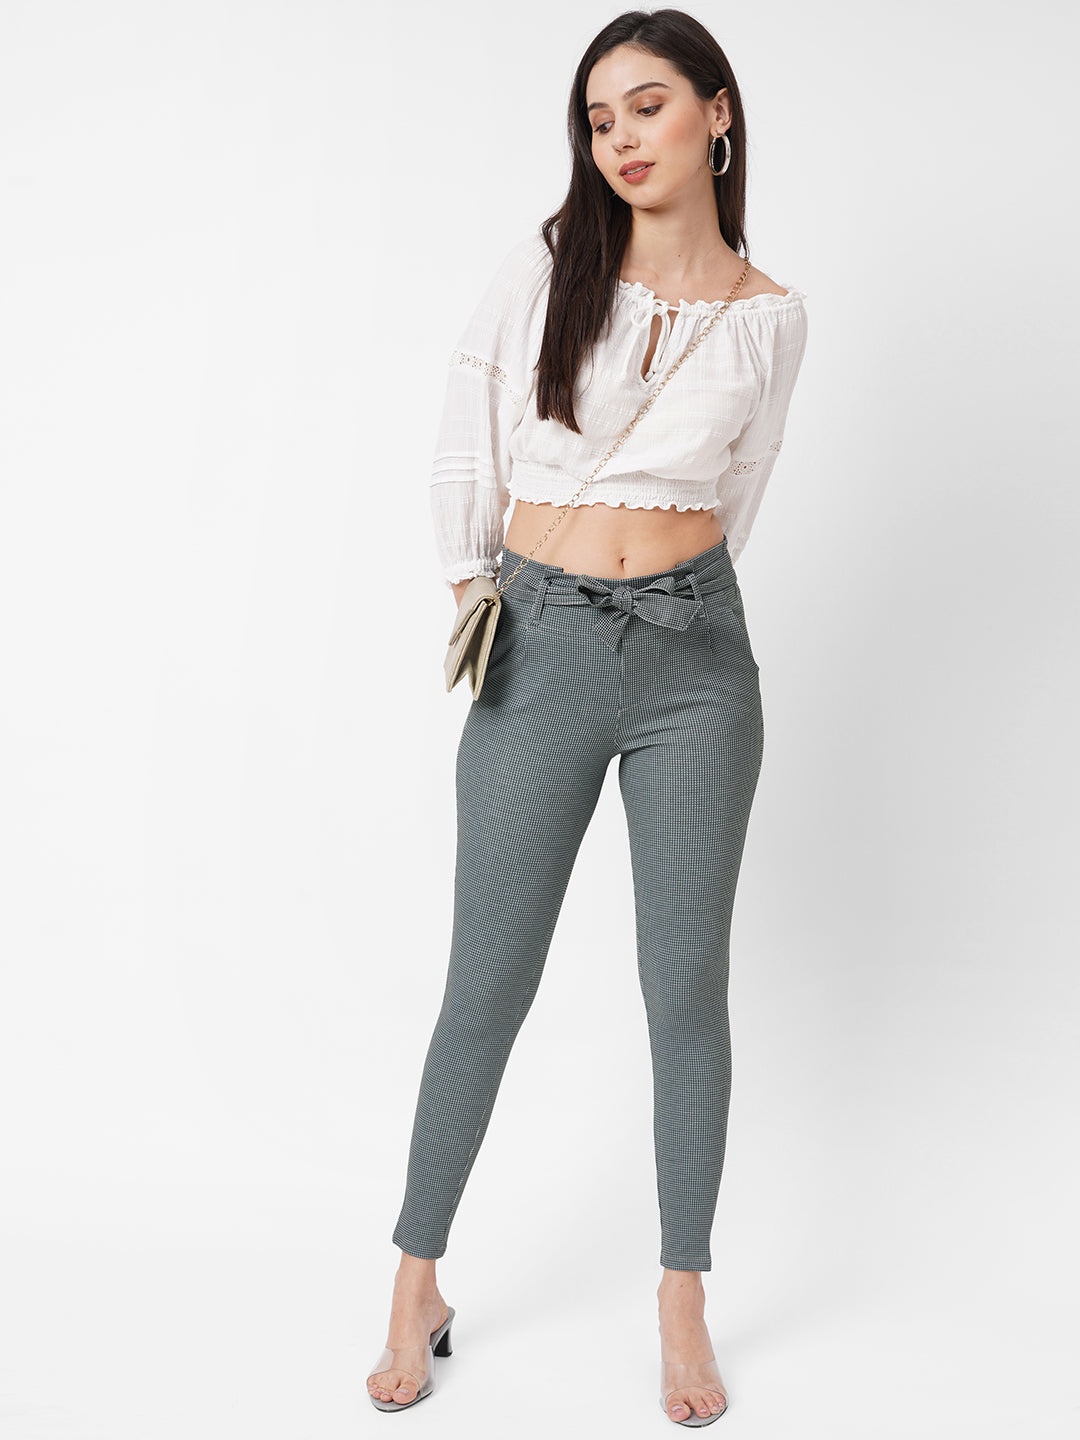 Women High-Rise Checked Paper Bag Pants